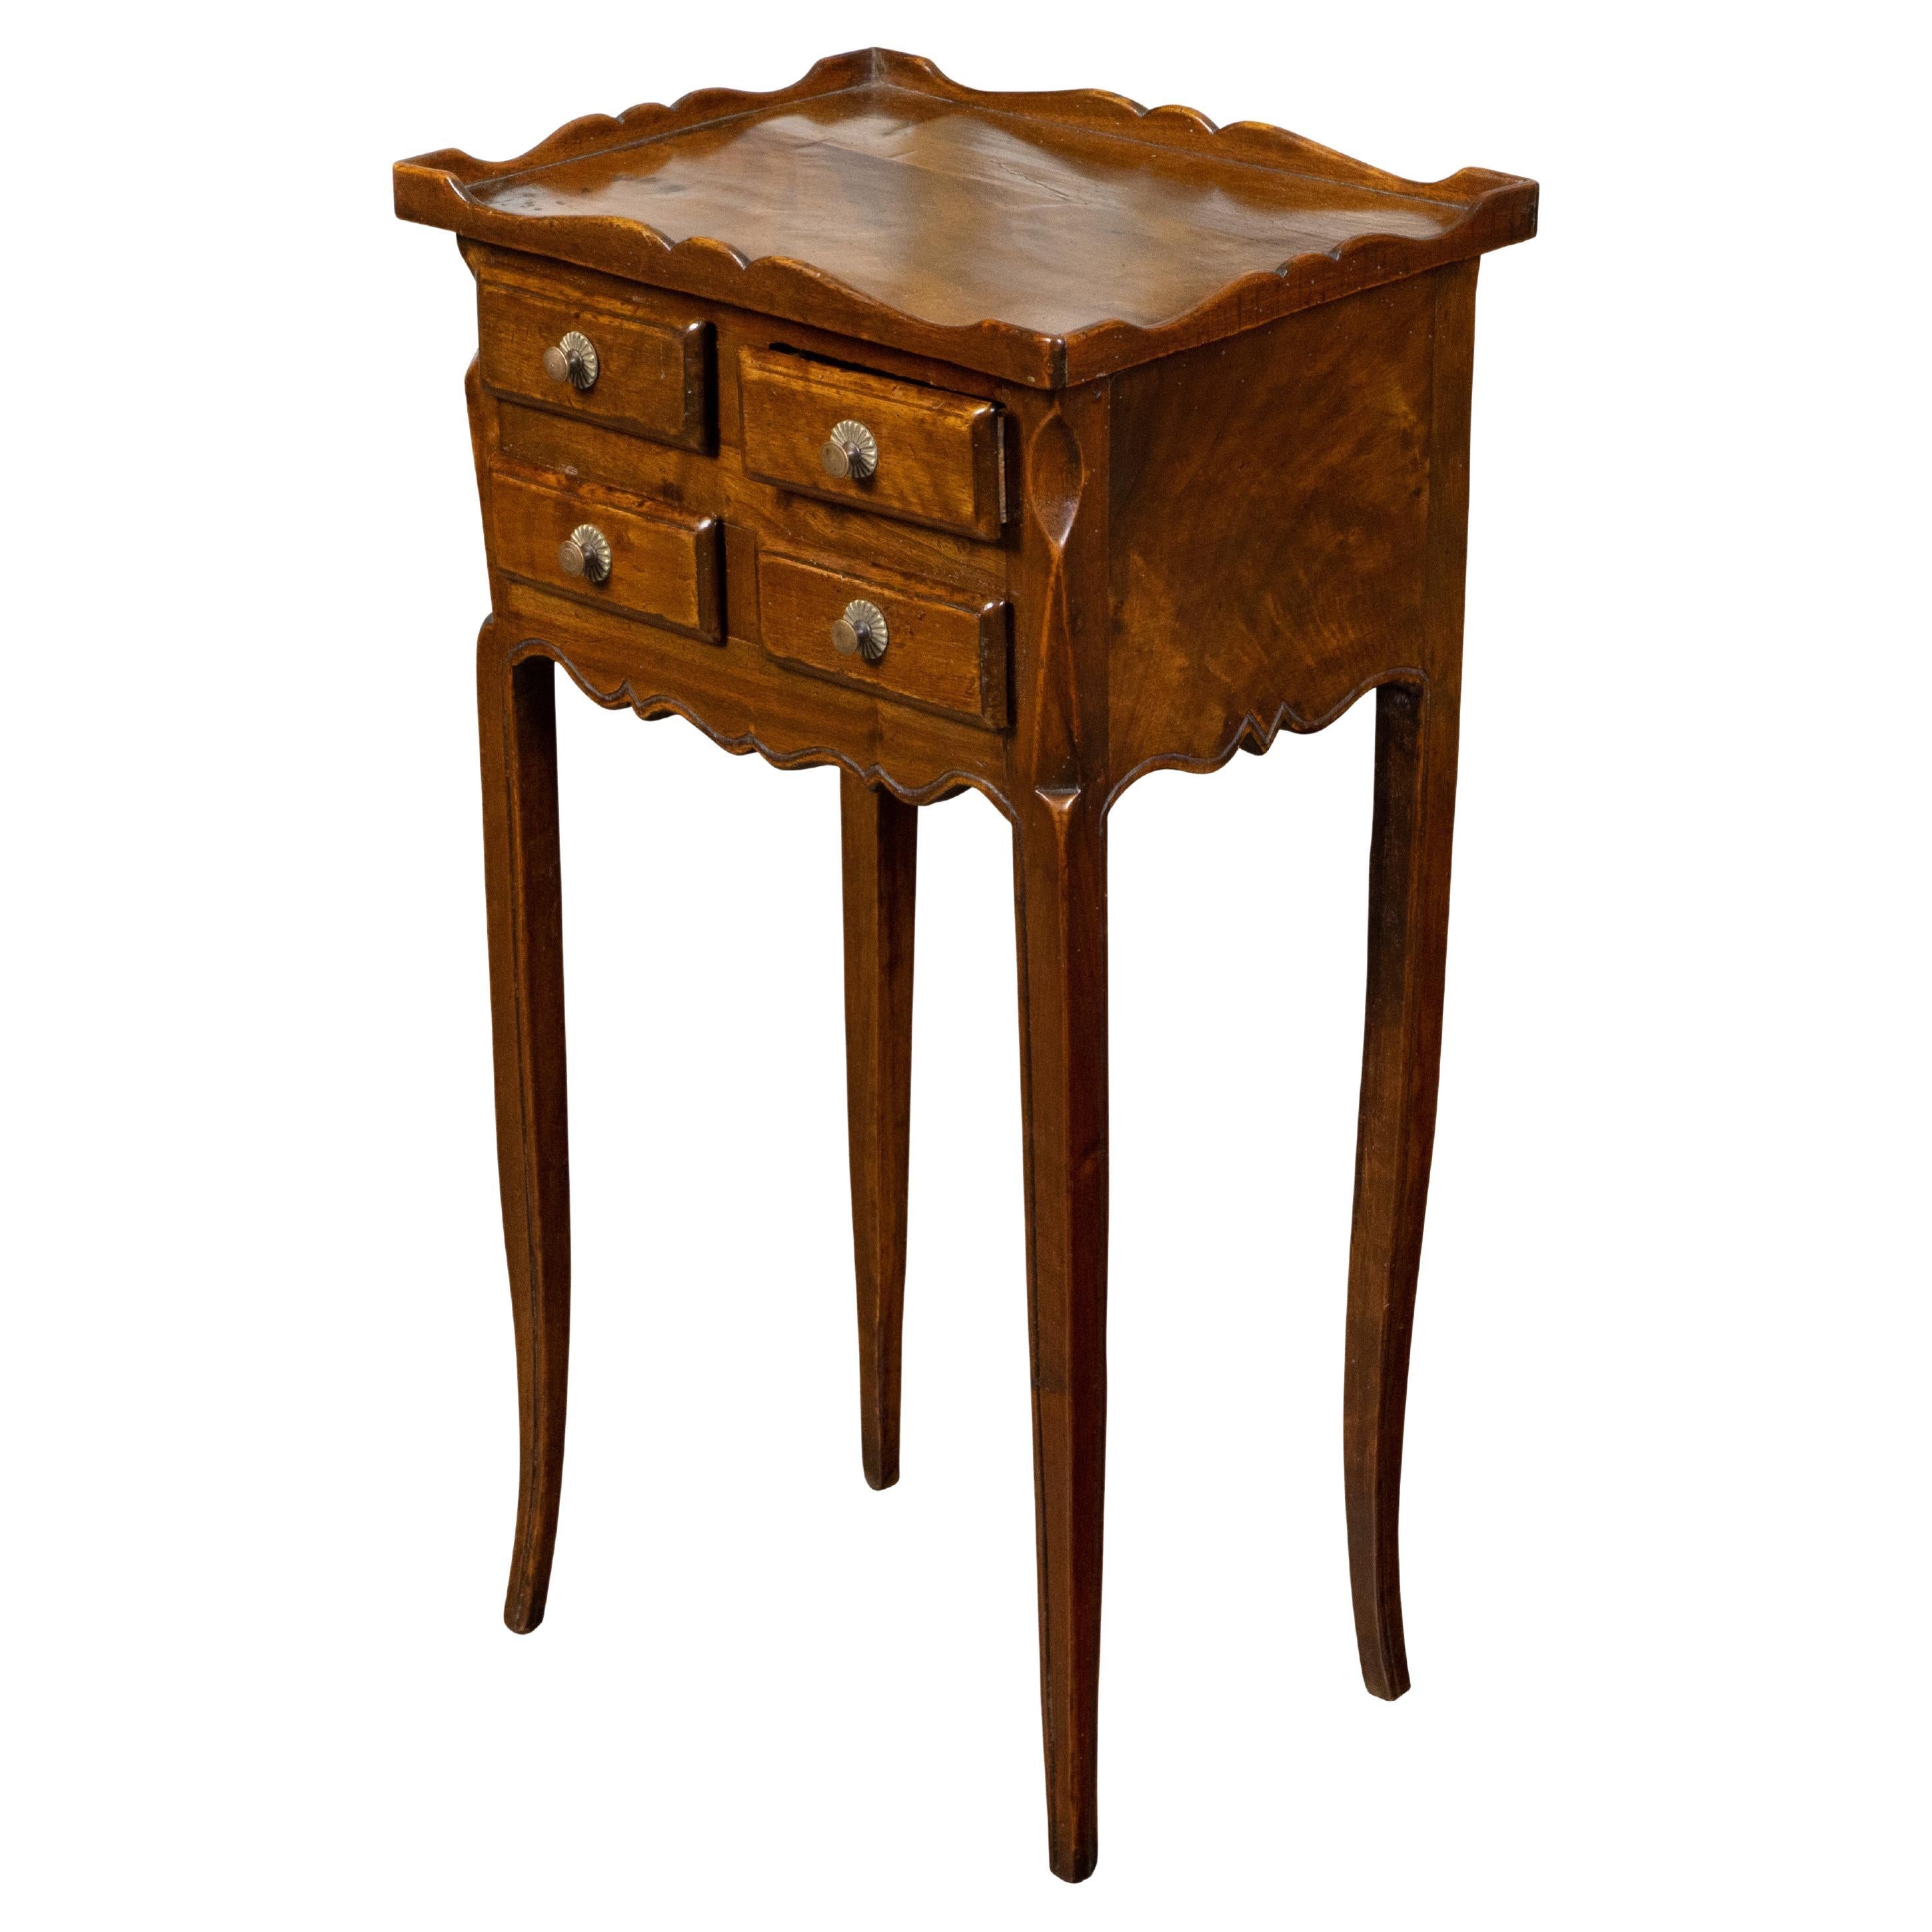 French, 1900s, Walnut Side Table with Carved Tray Top and Four Small Drawers